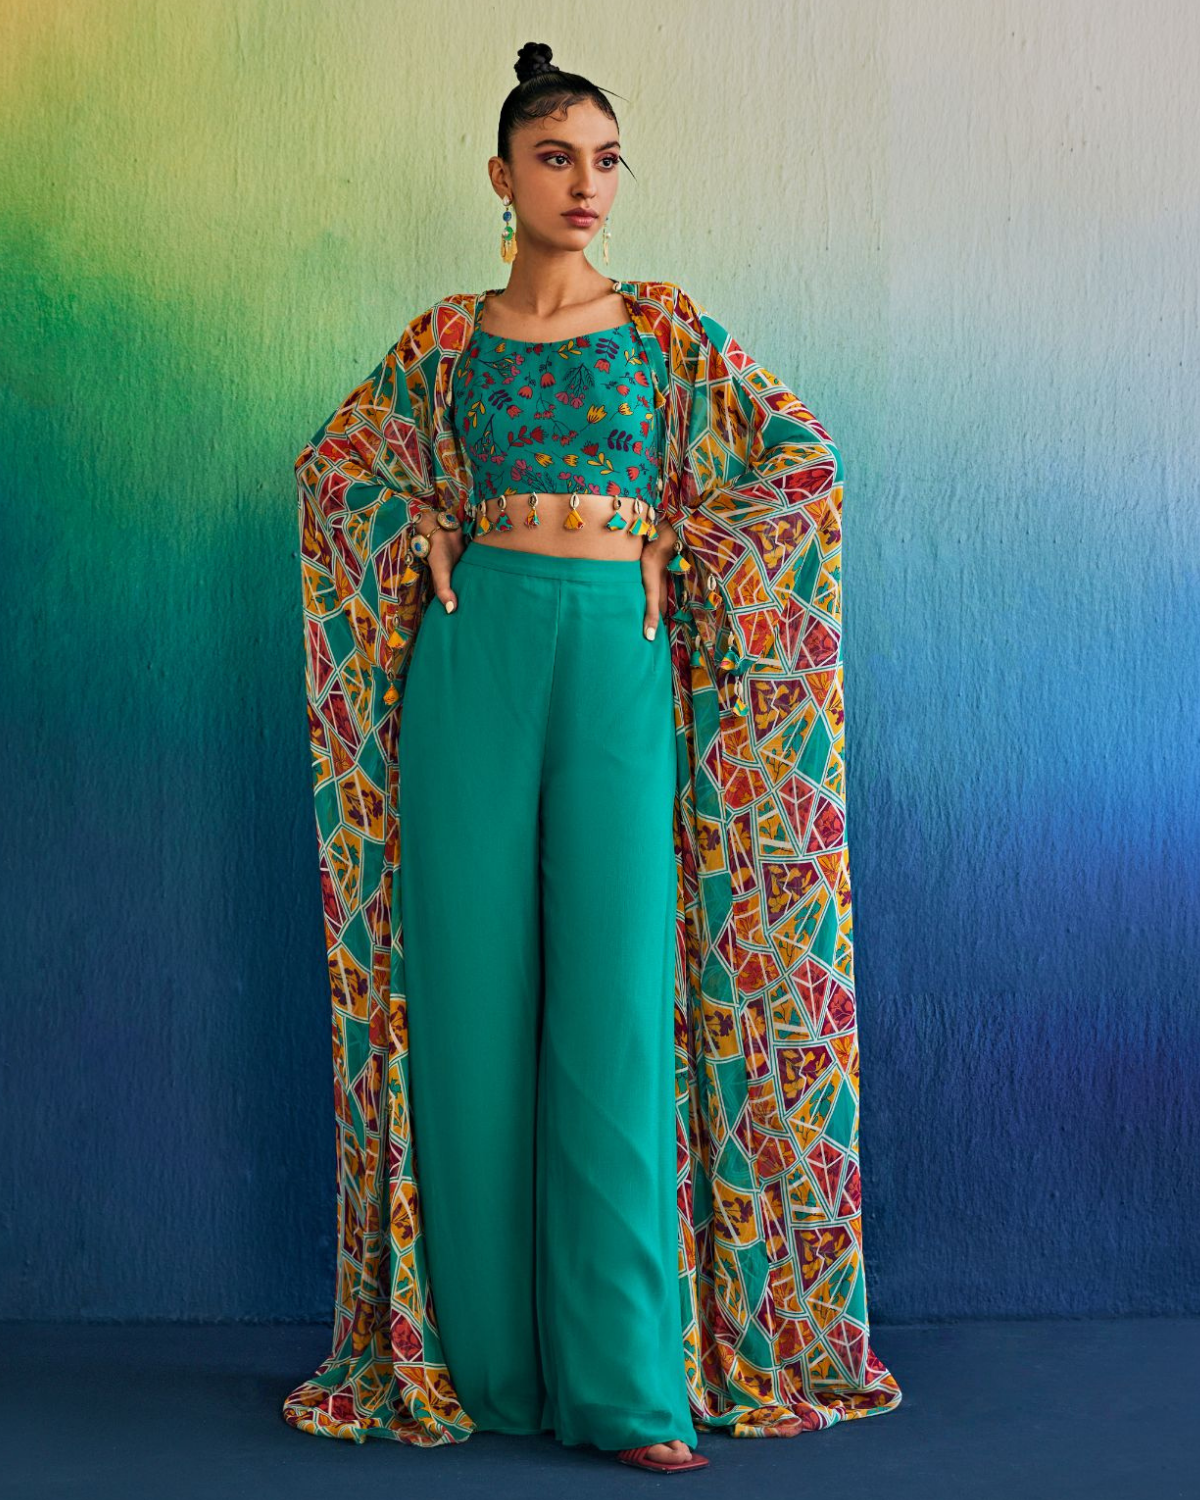 Teal Floral Butta Print Bustier & Teal Aztec Print Cape With Teal Pants